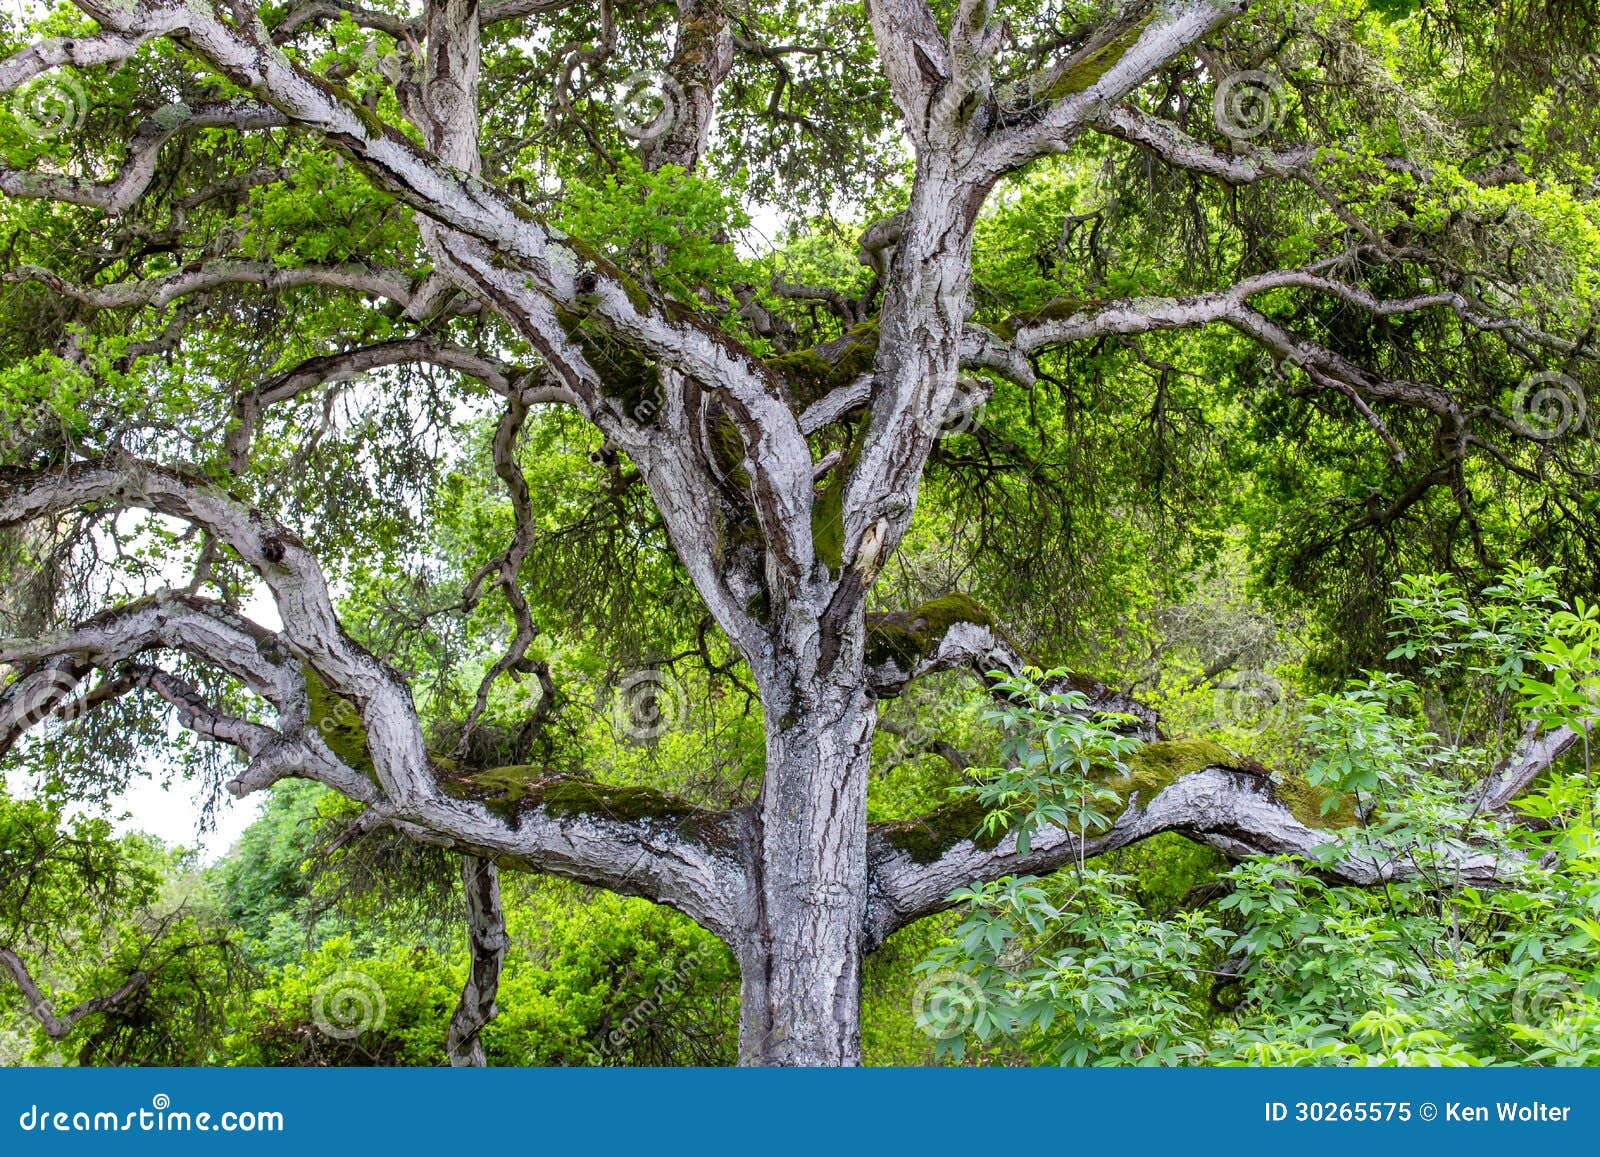 towering branches of hybrid live oak tree